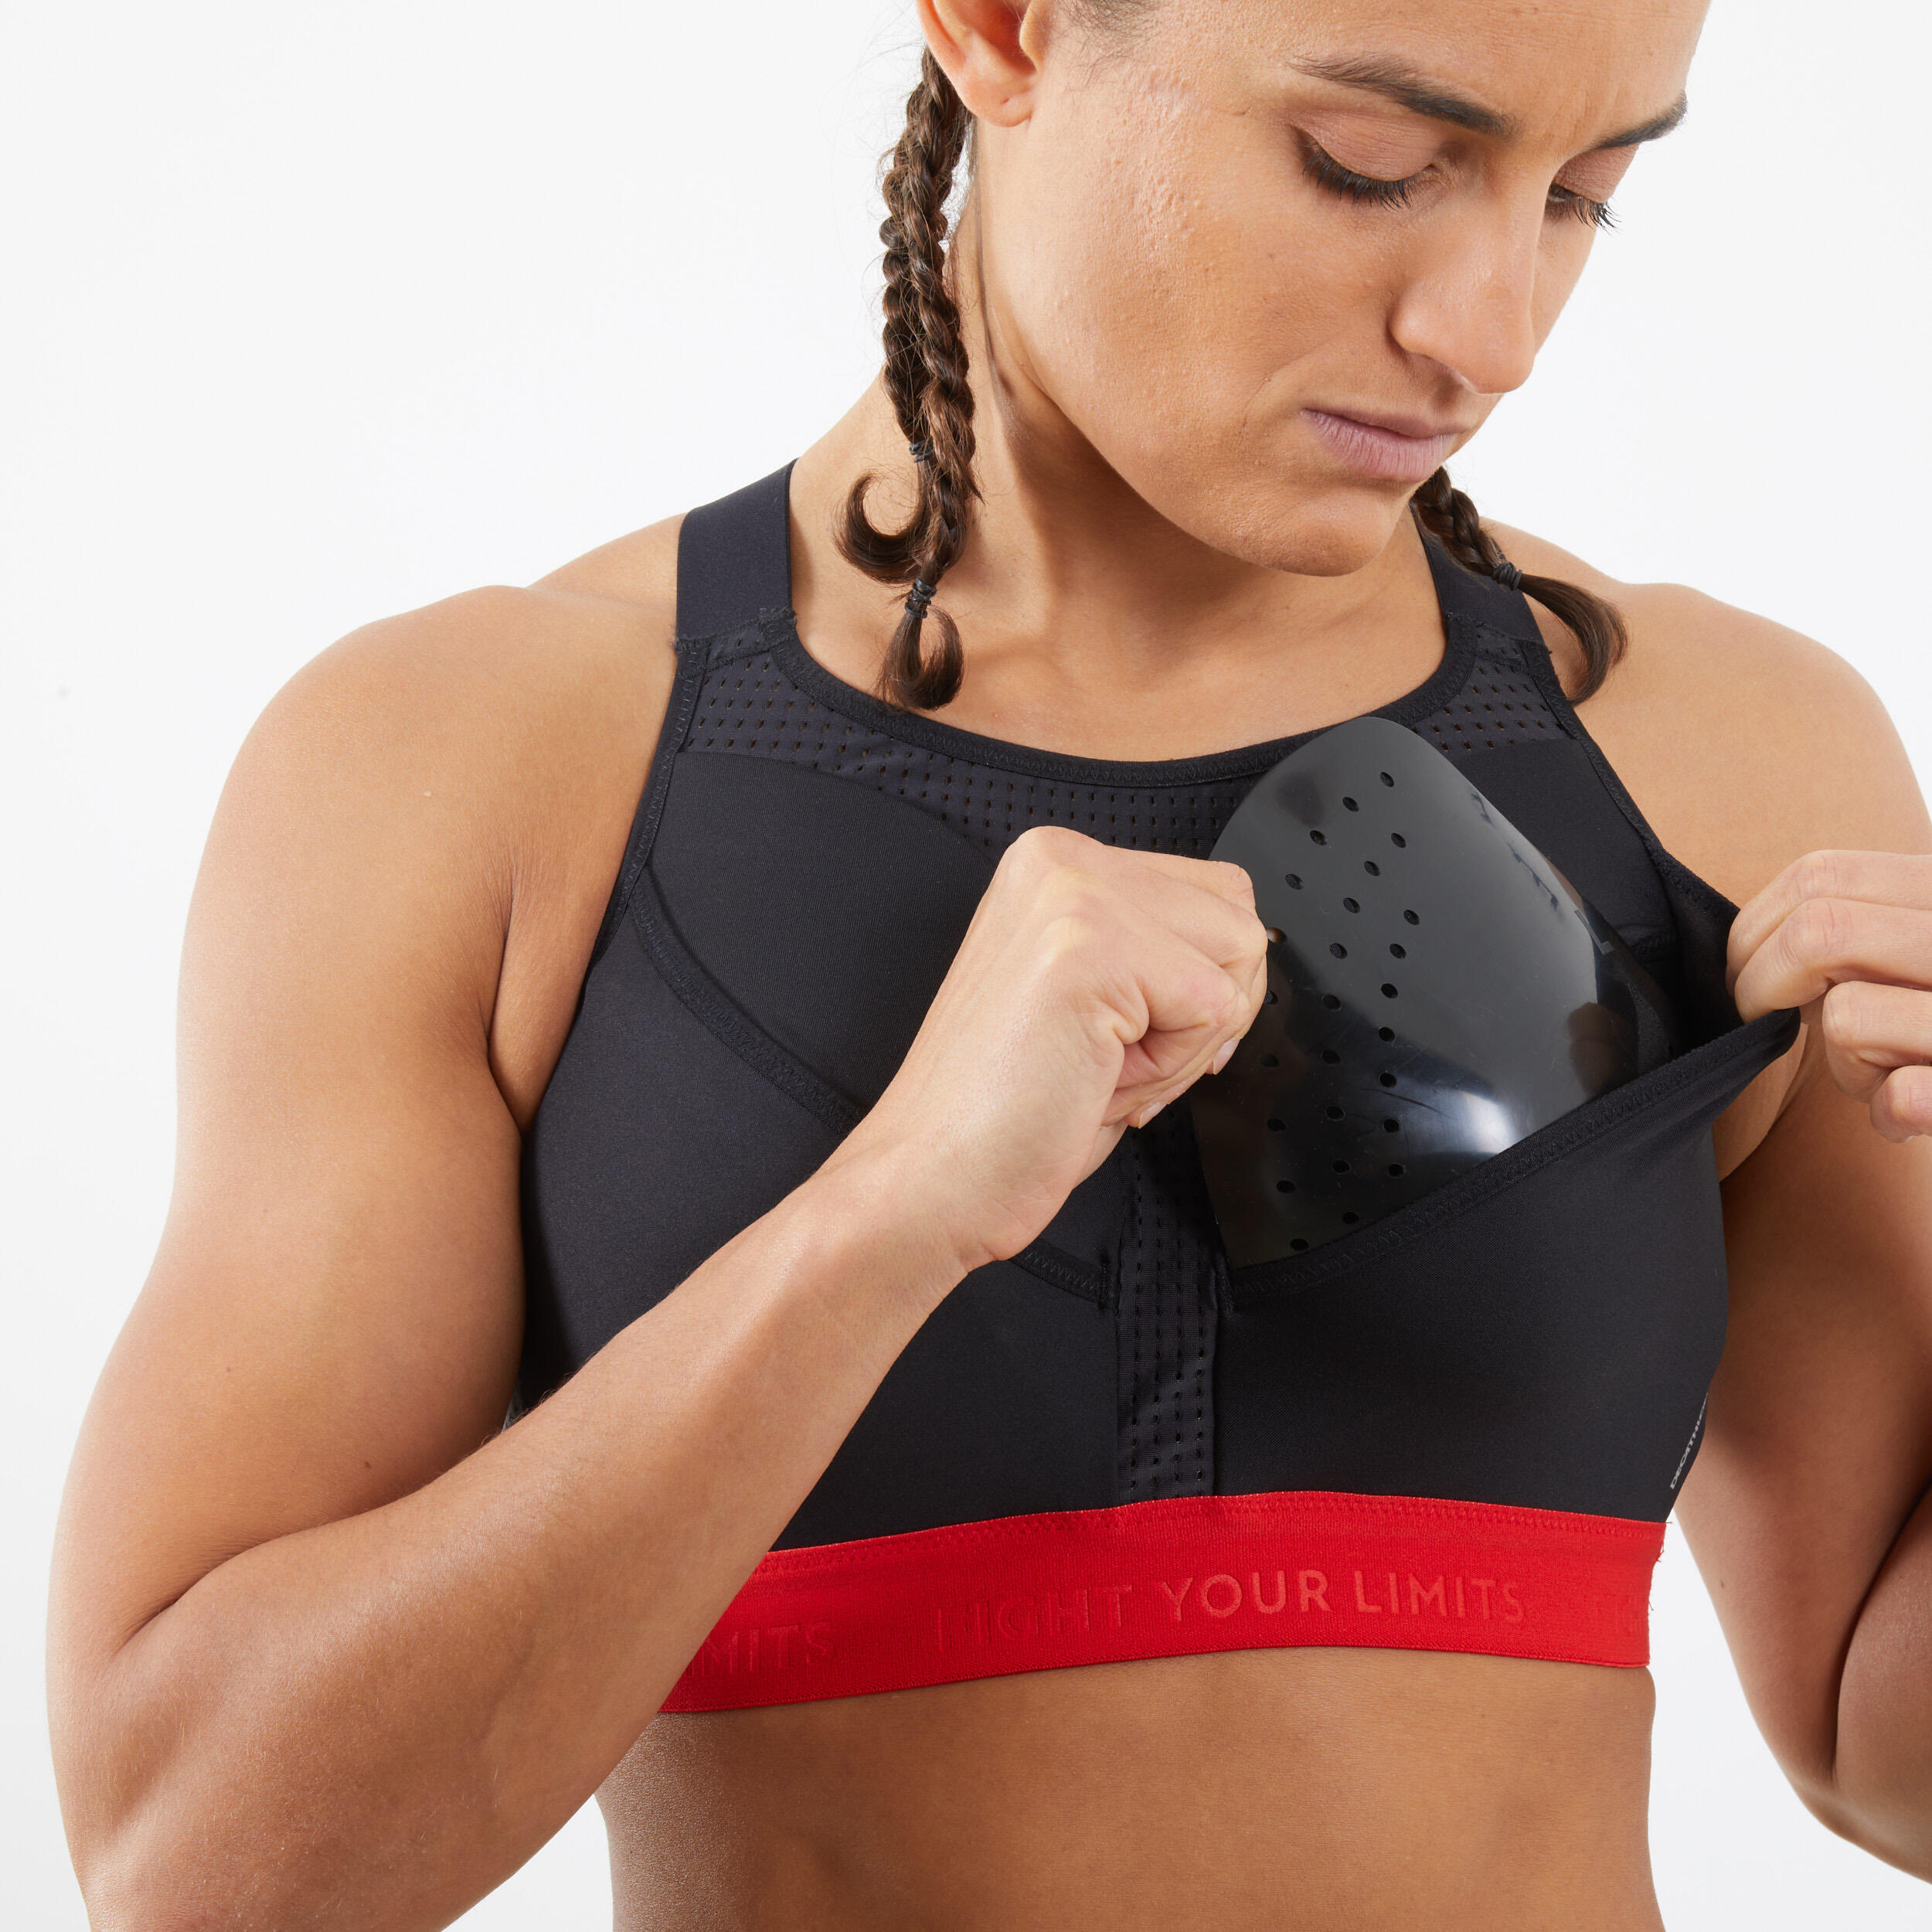 Boxing 2-In-1 Sports Bra: Support and Protection OUTSHOCK